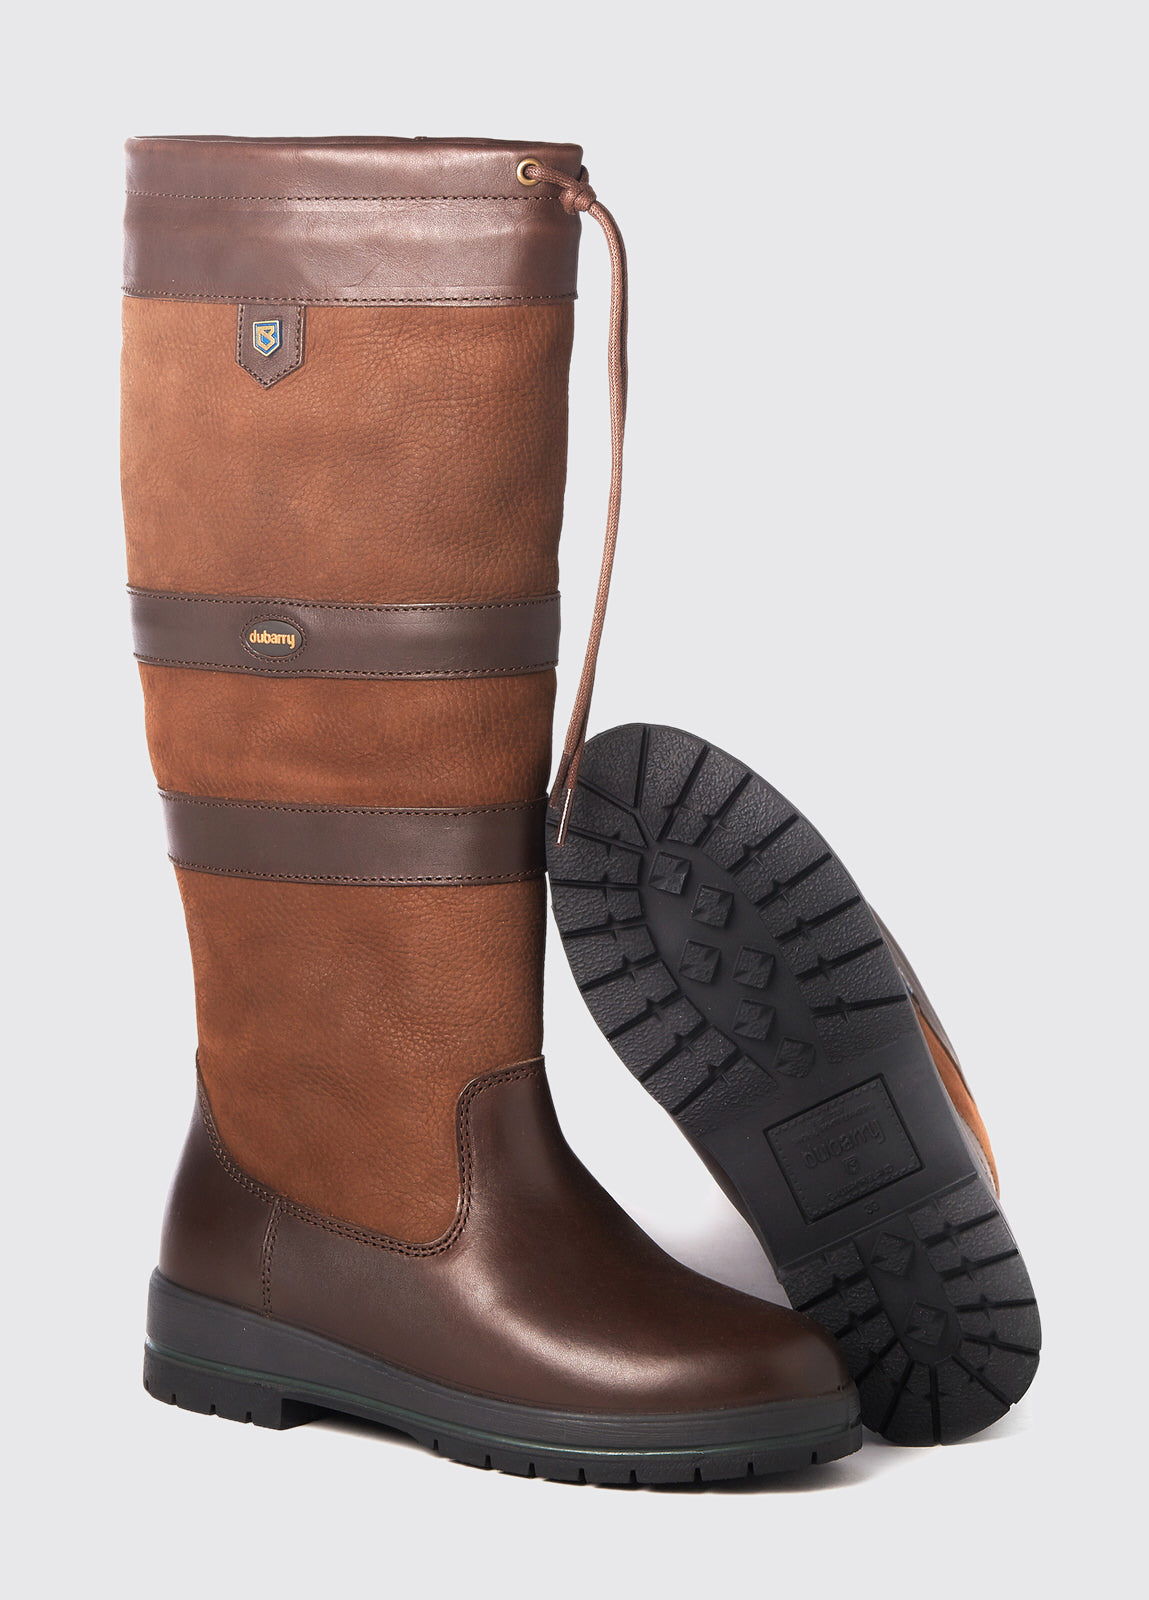 Dubarry Galway Extrafit Country Boot in Walnut